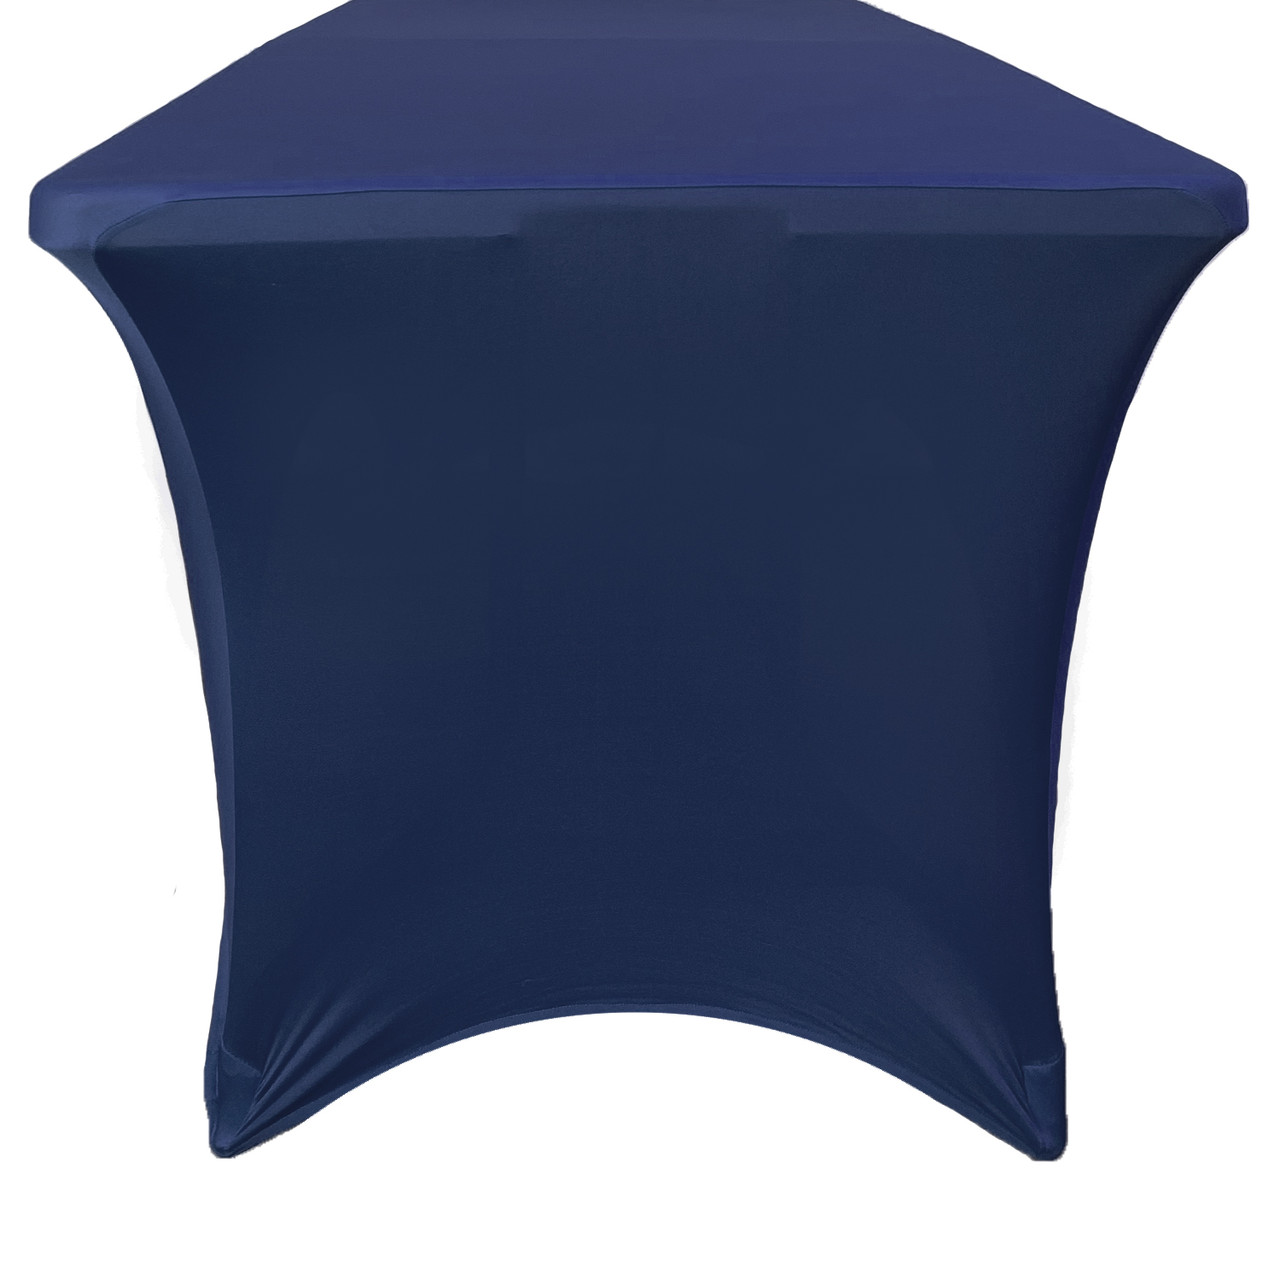 Stretch Spandex 6 ft Rectangular Table Cover Navy Blue - Your